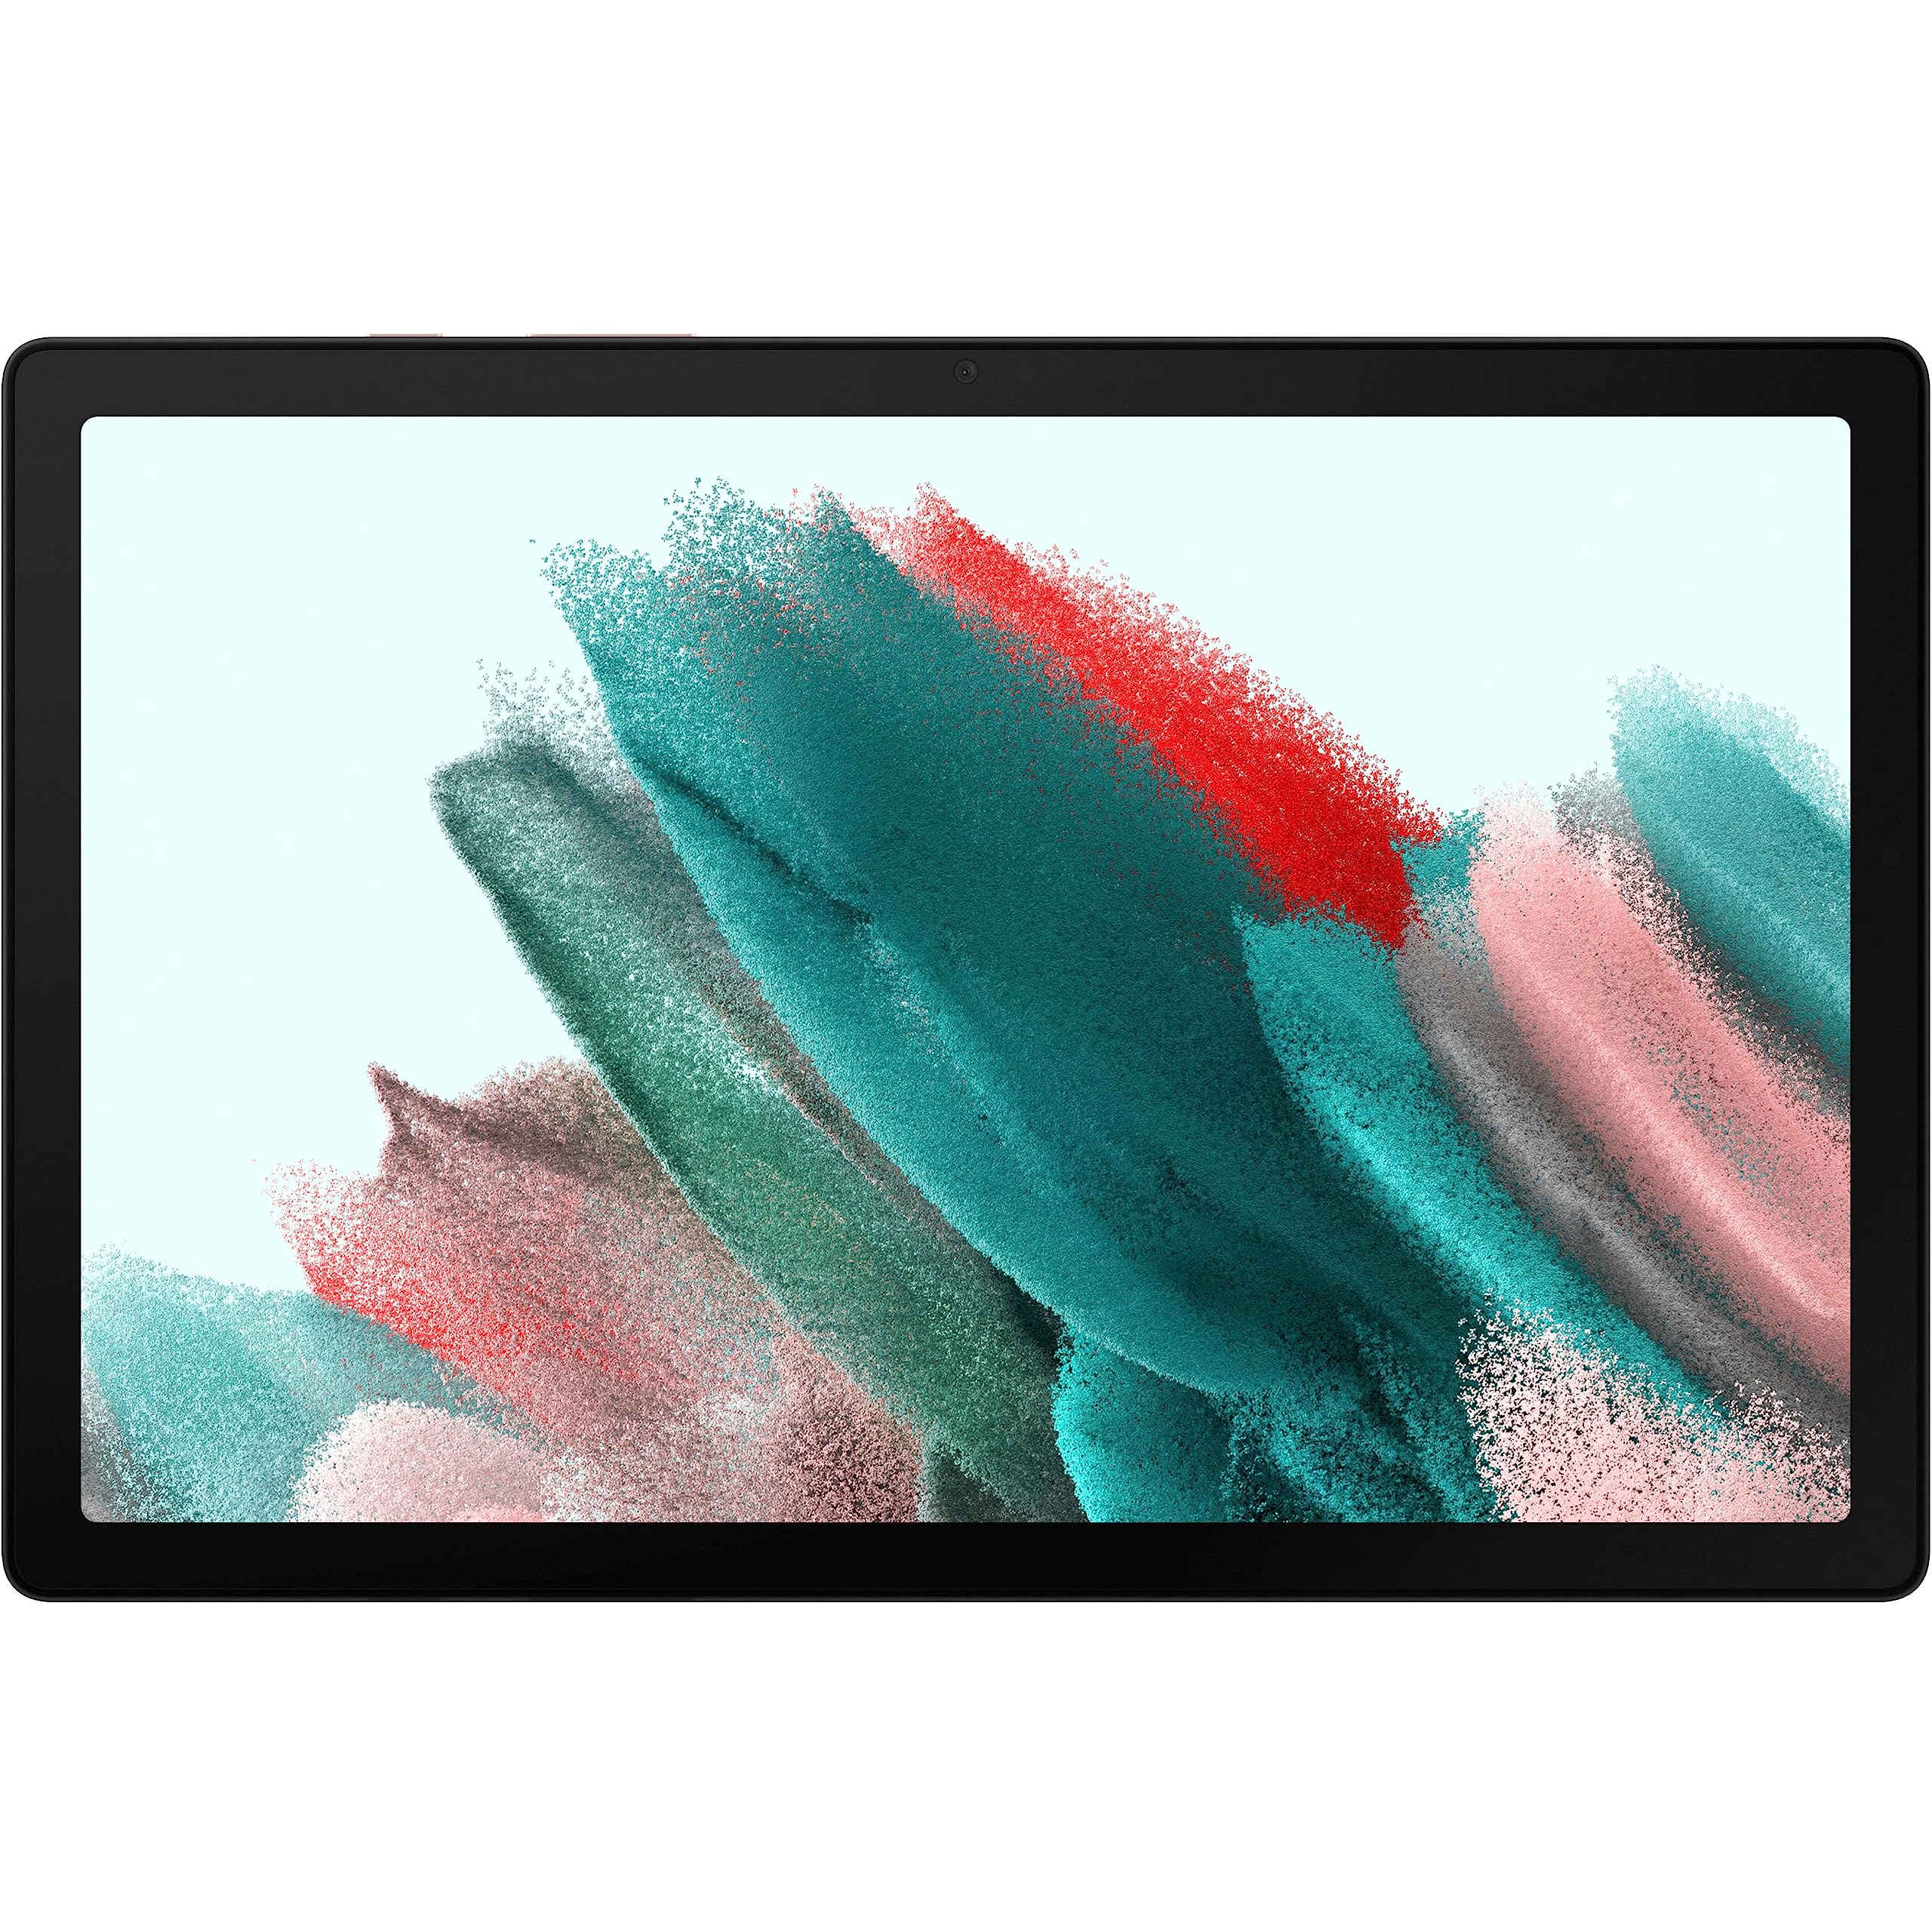 Samsung Galaxy Tab A8 10.5" FHD Touchscreen Android Wi-Fi Tablet, Pink Gold, 32GB Memory, Octa-core Processor, 3GB RAM, 8MP Rear + 5MP Front Camera, Bluetooth v5.0